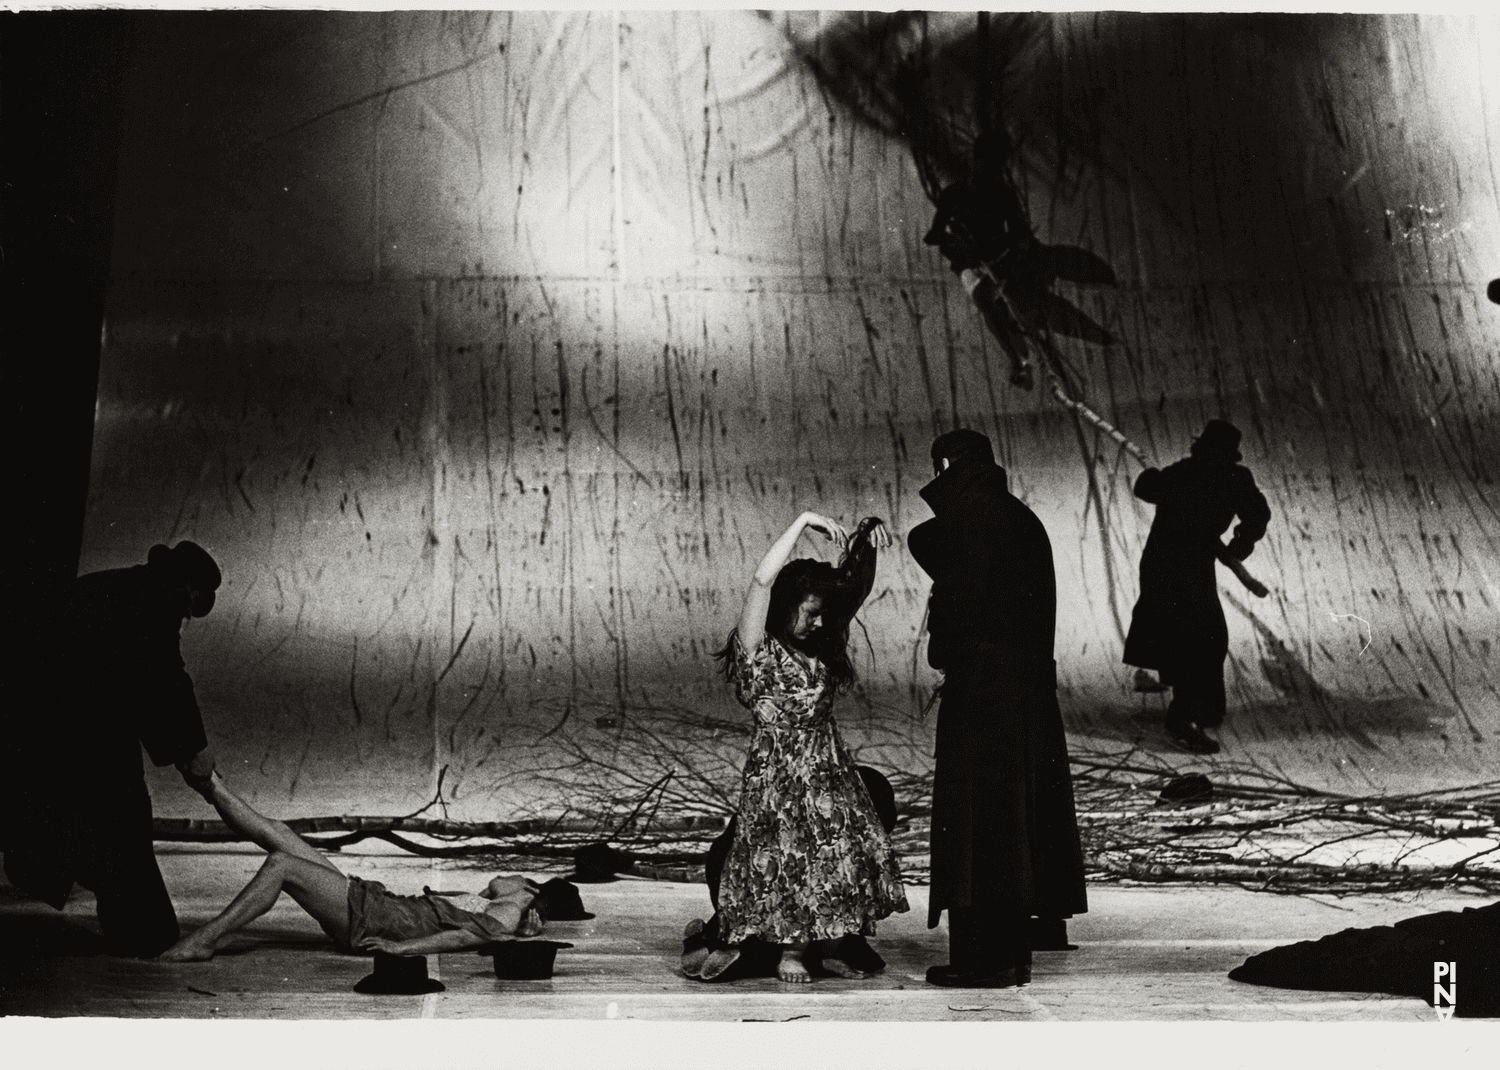 Josephine Ann Endicott in “Come Dance With Me” by Pina Bausch